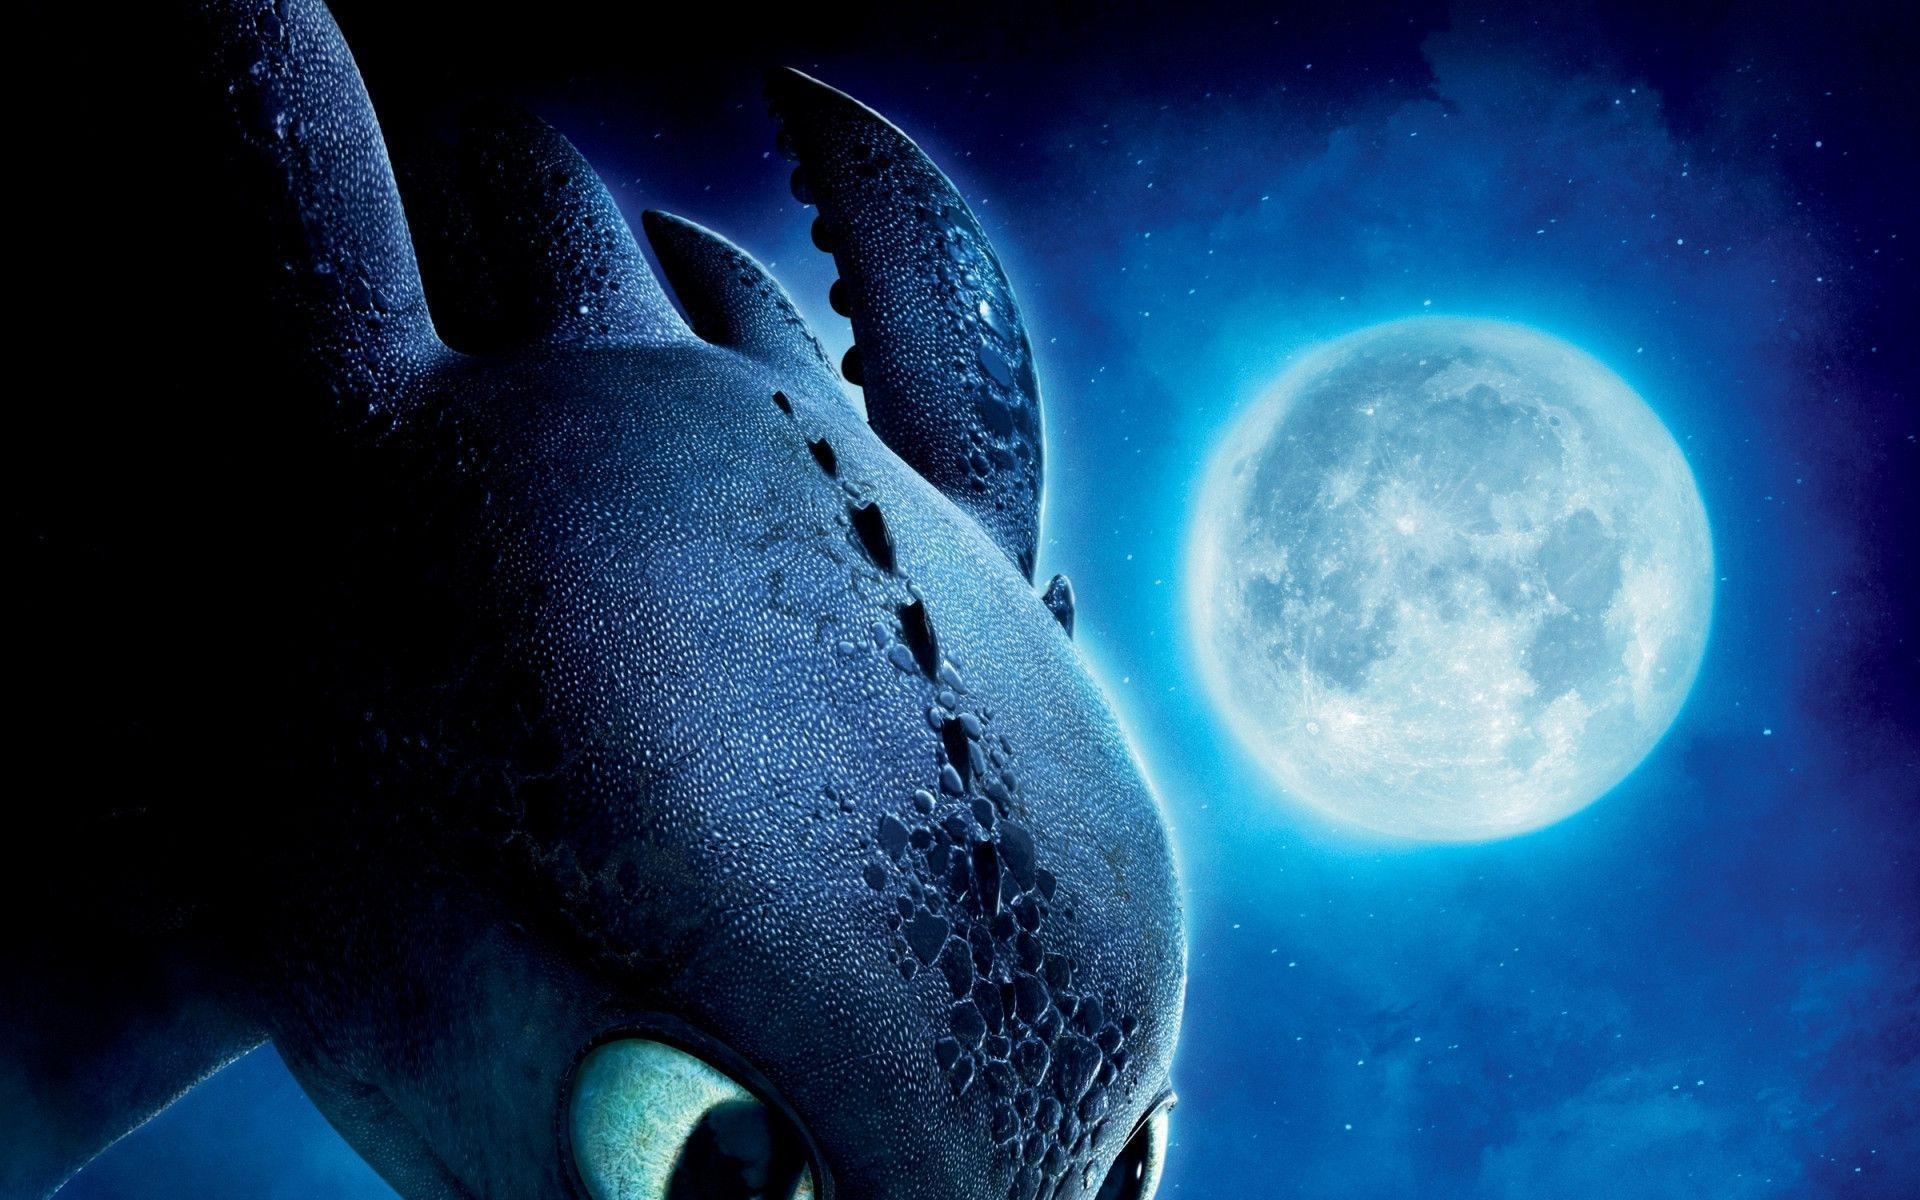 Toothless Dragon Wallpapers - Wallpaper Cave